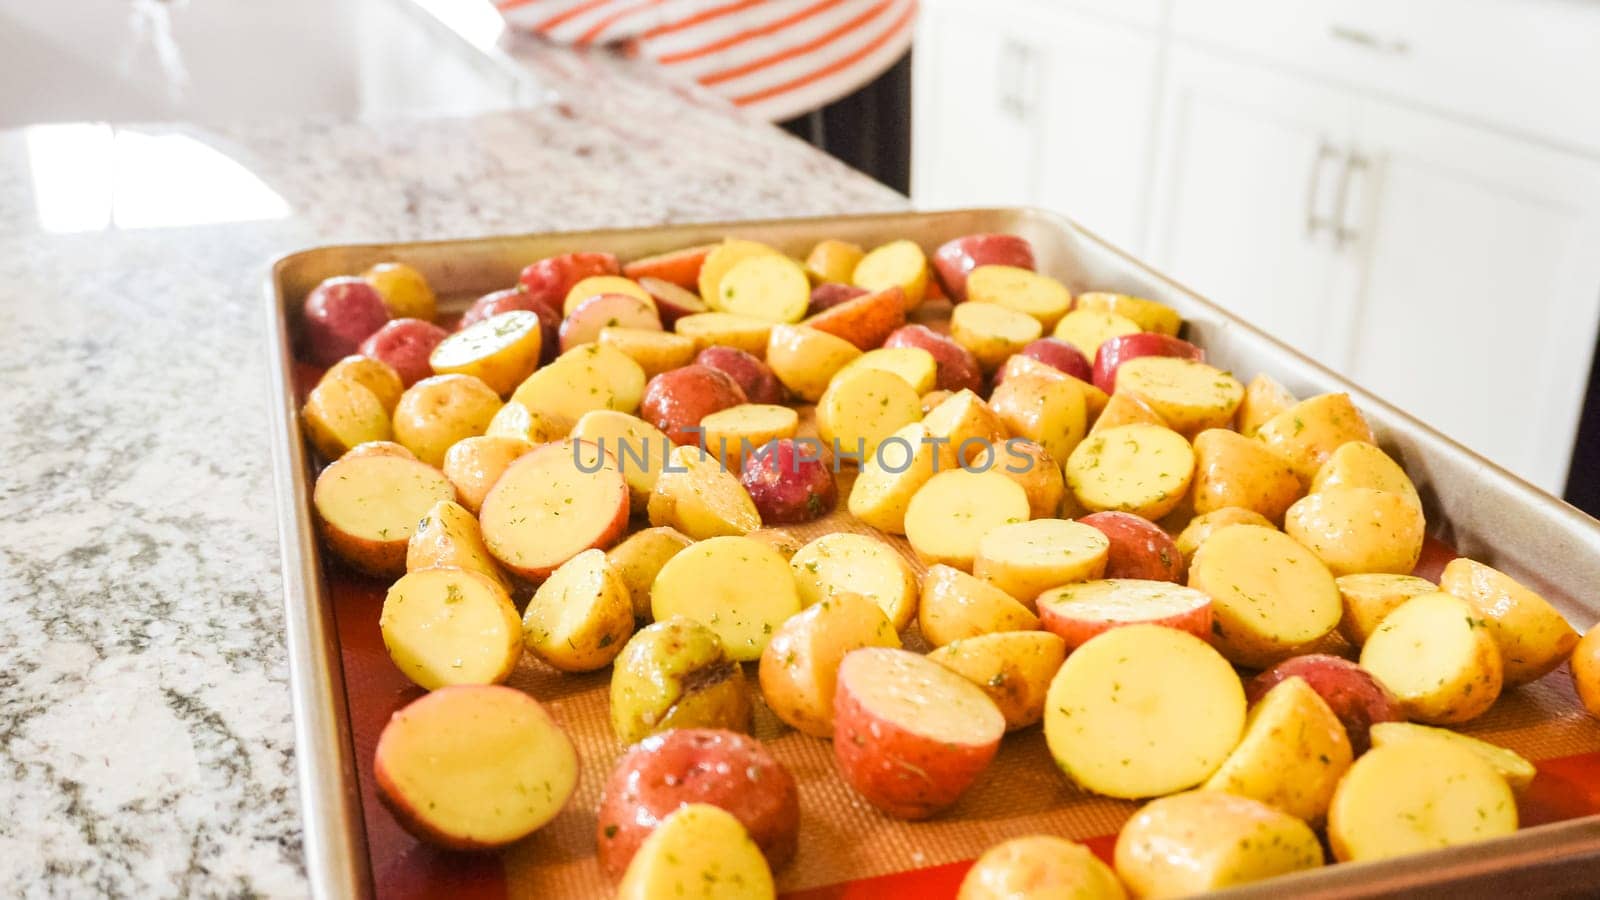 In a modern, white kitchen, a young man is engrossed in dinner preparations. His current endeavor includes arranging seasoned rainbow potatoes on a baking sheet, a meticulous step towards a promisingly tasty meal.